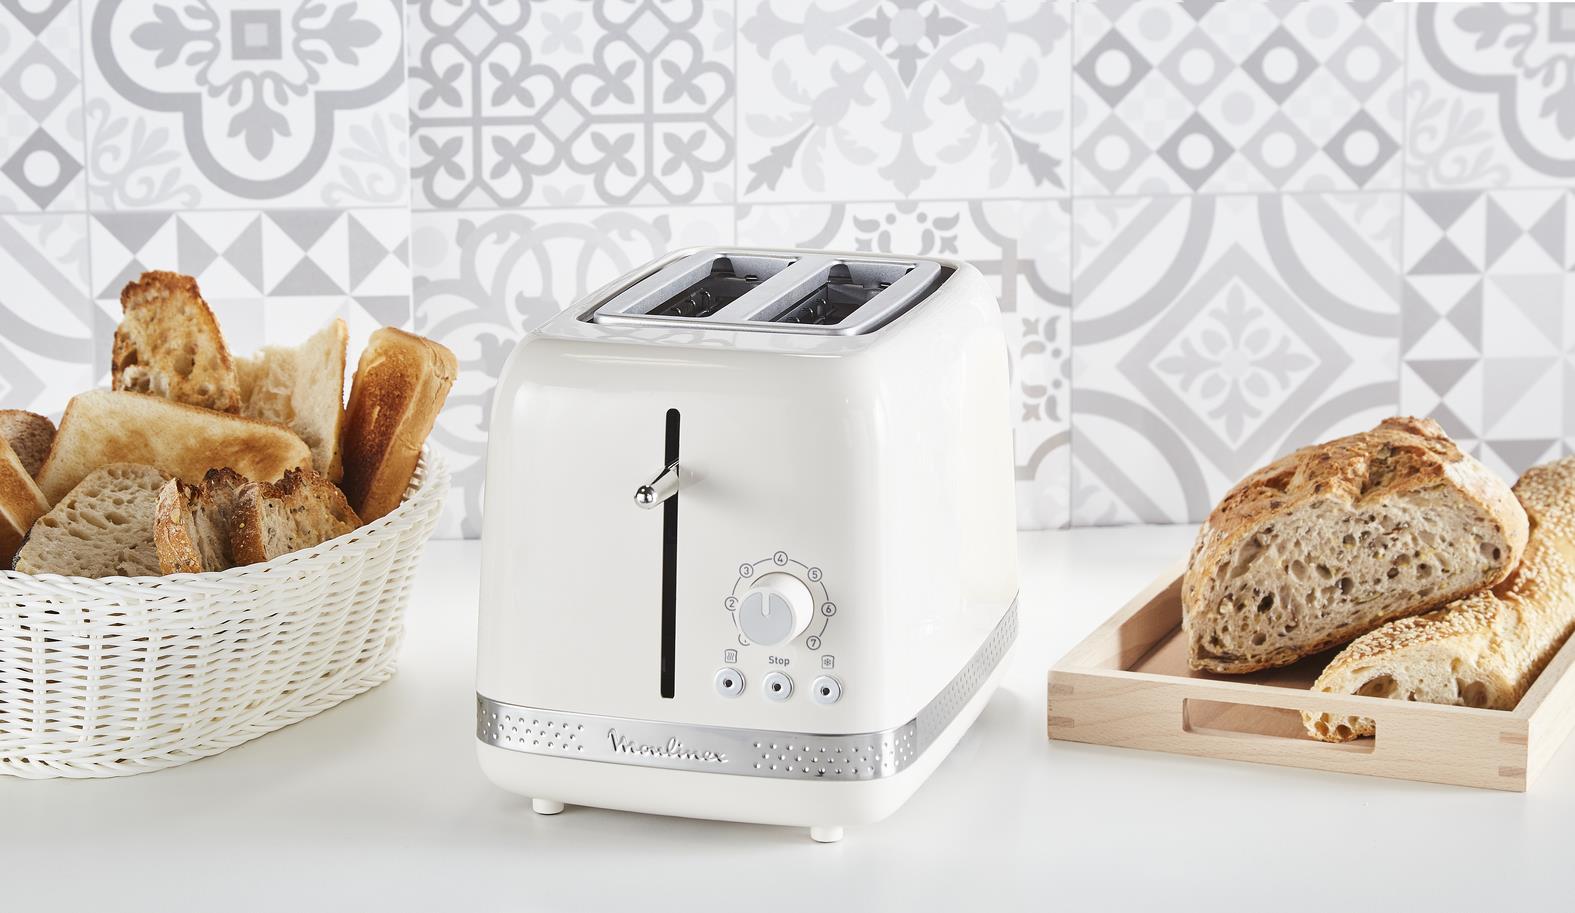 MOULINEX TOASTER SOLEIL 2S LT300  Tostapane e tostiere in Offerta